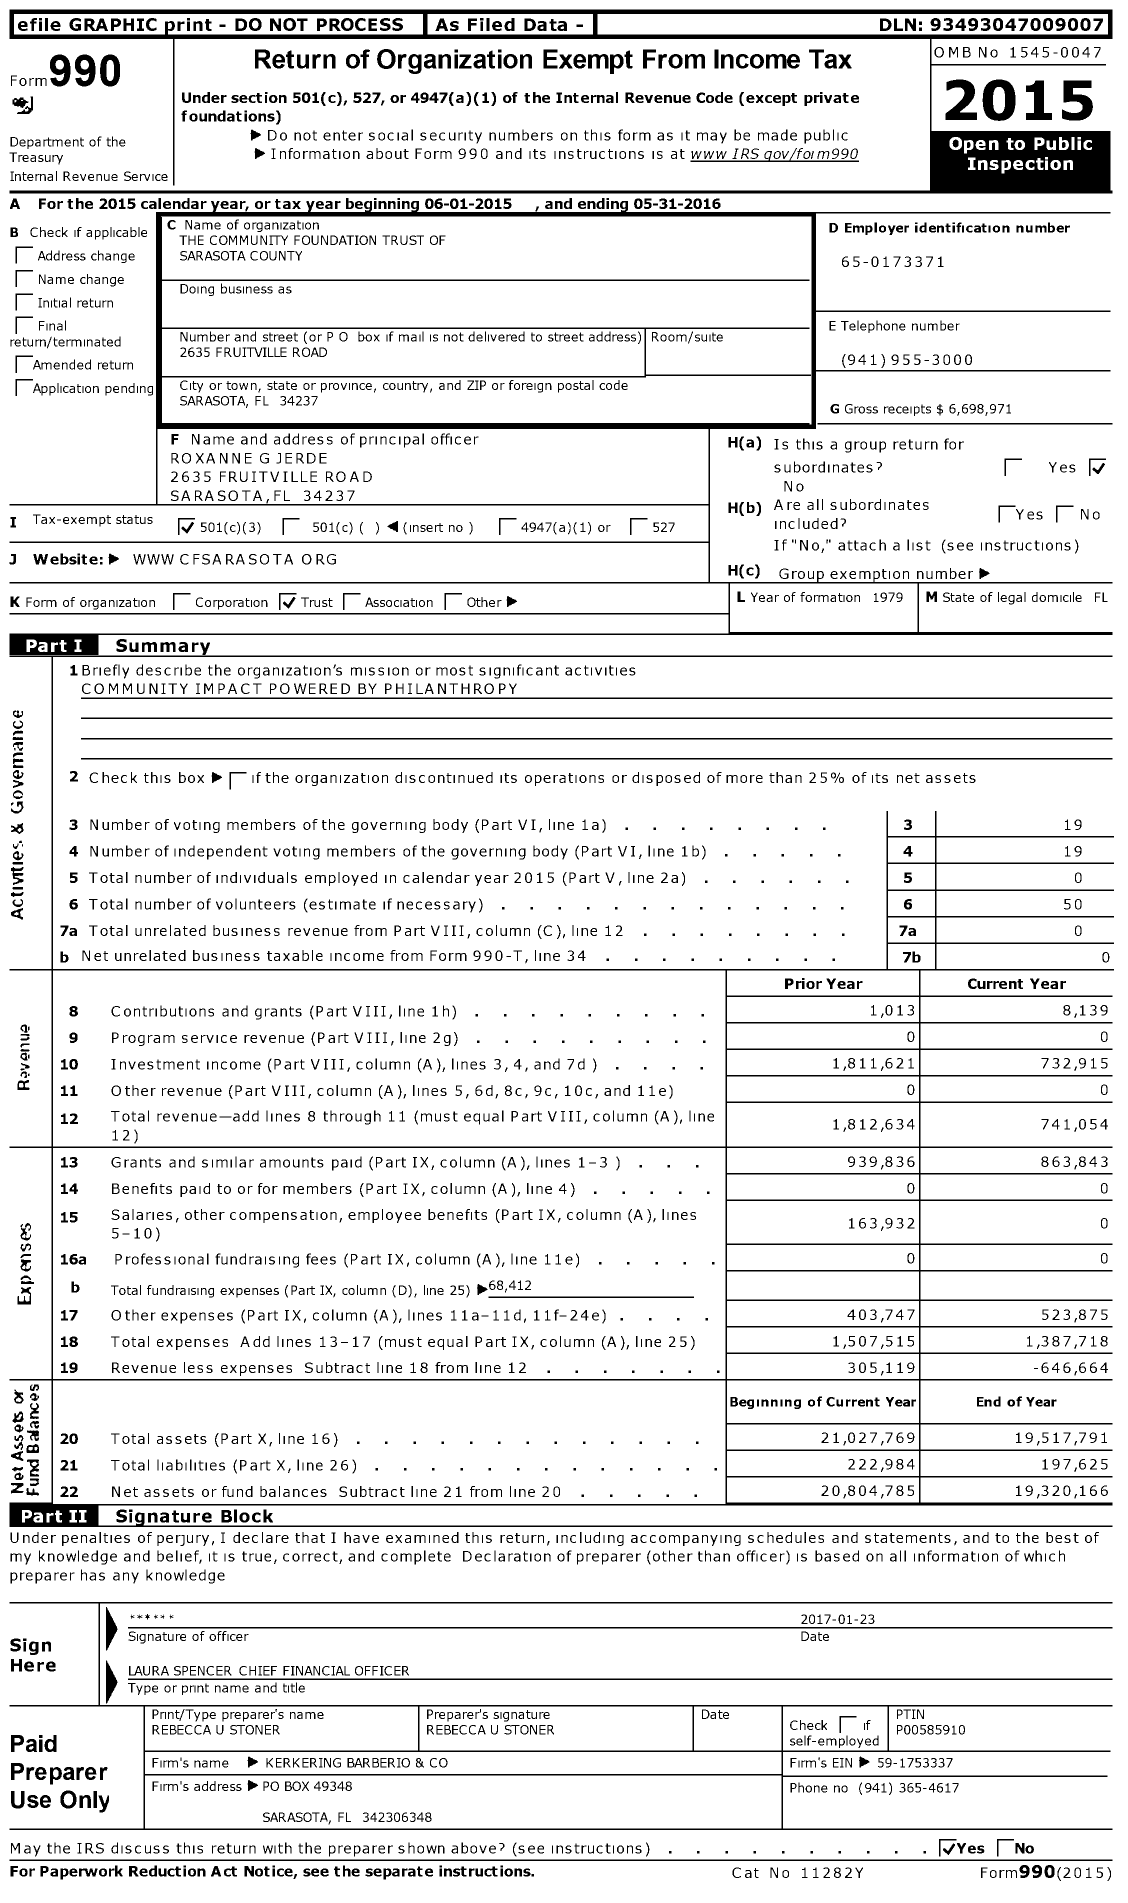 Image of first page of 2015 Form 990 for The Community Foundation Trust of Sarasota County